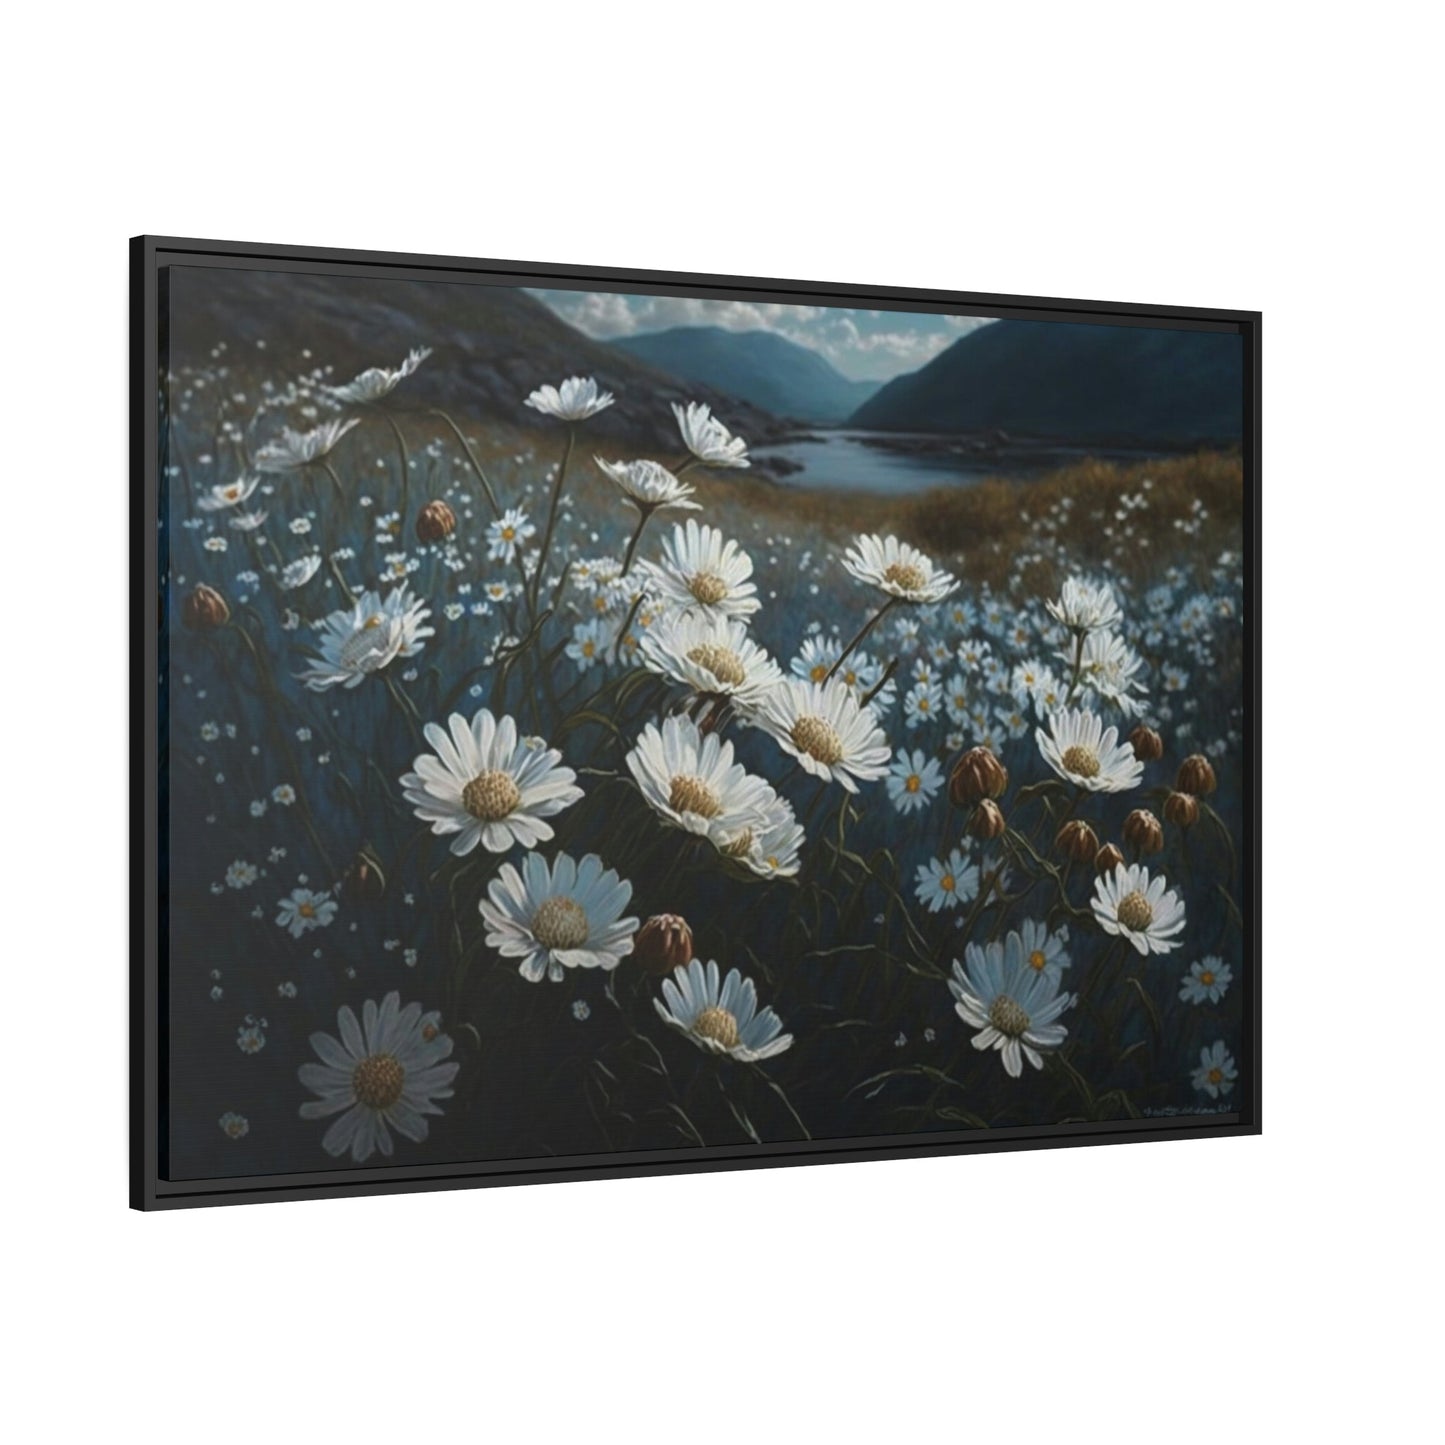 Radiant Daisies: Floral Artwork on Canvas & Posters for Home Decor